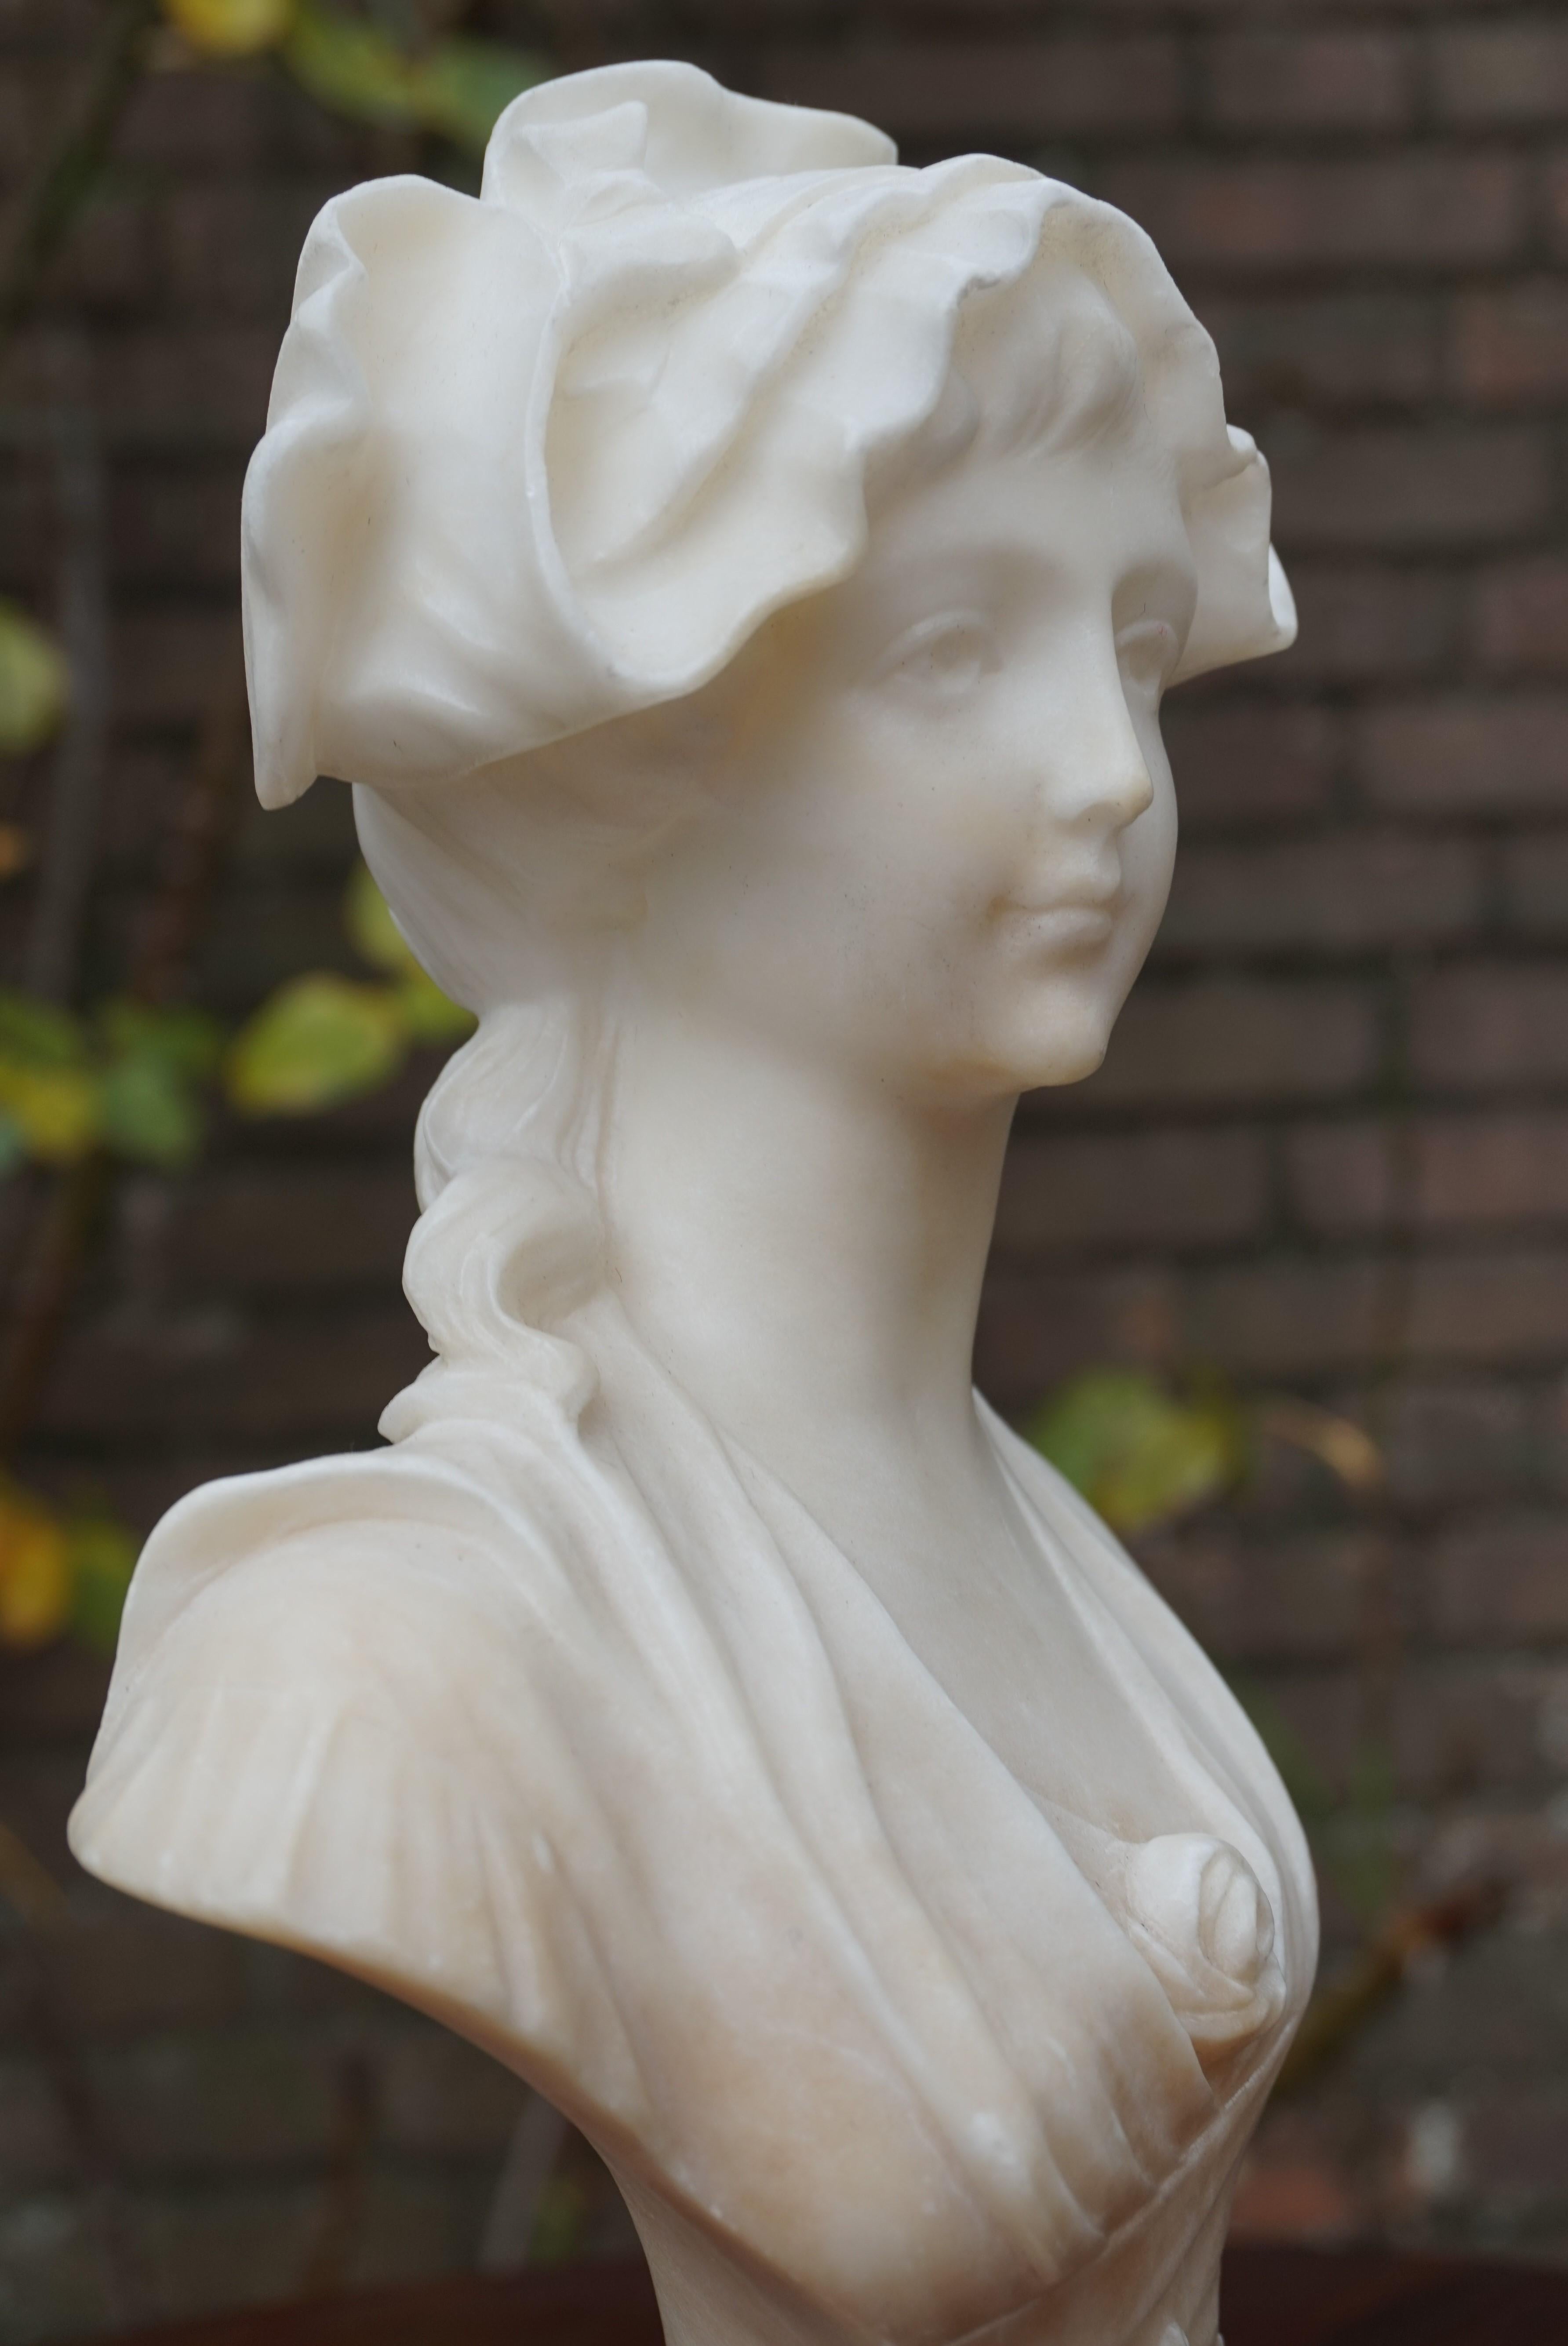 Small size and great quality, female bust sculpture with signature.

Judging from the perfect balance, the details and the marvelous facial expression of this antique Art Nouveau bust, this is the work of a master sculptor. The pleasantly calm look